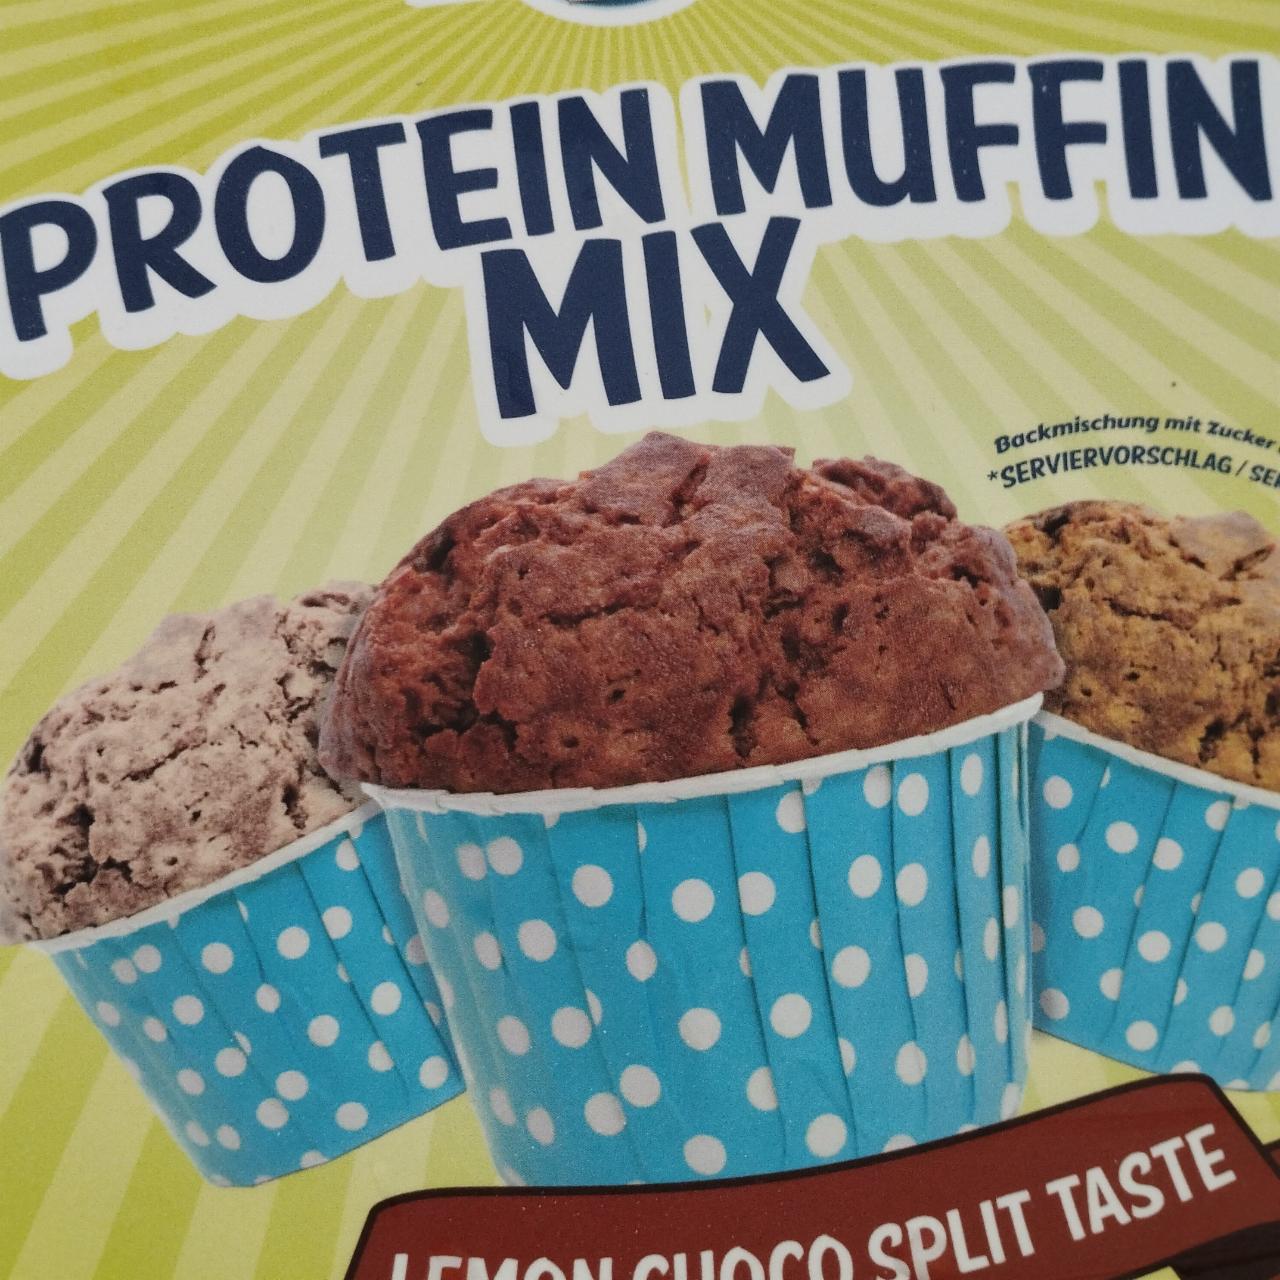 Fotografie - Protein muffin mix Frankys bakery